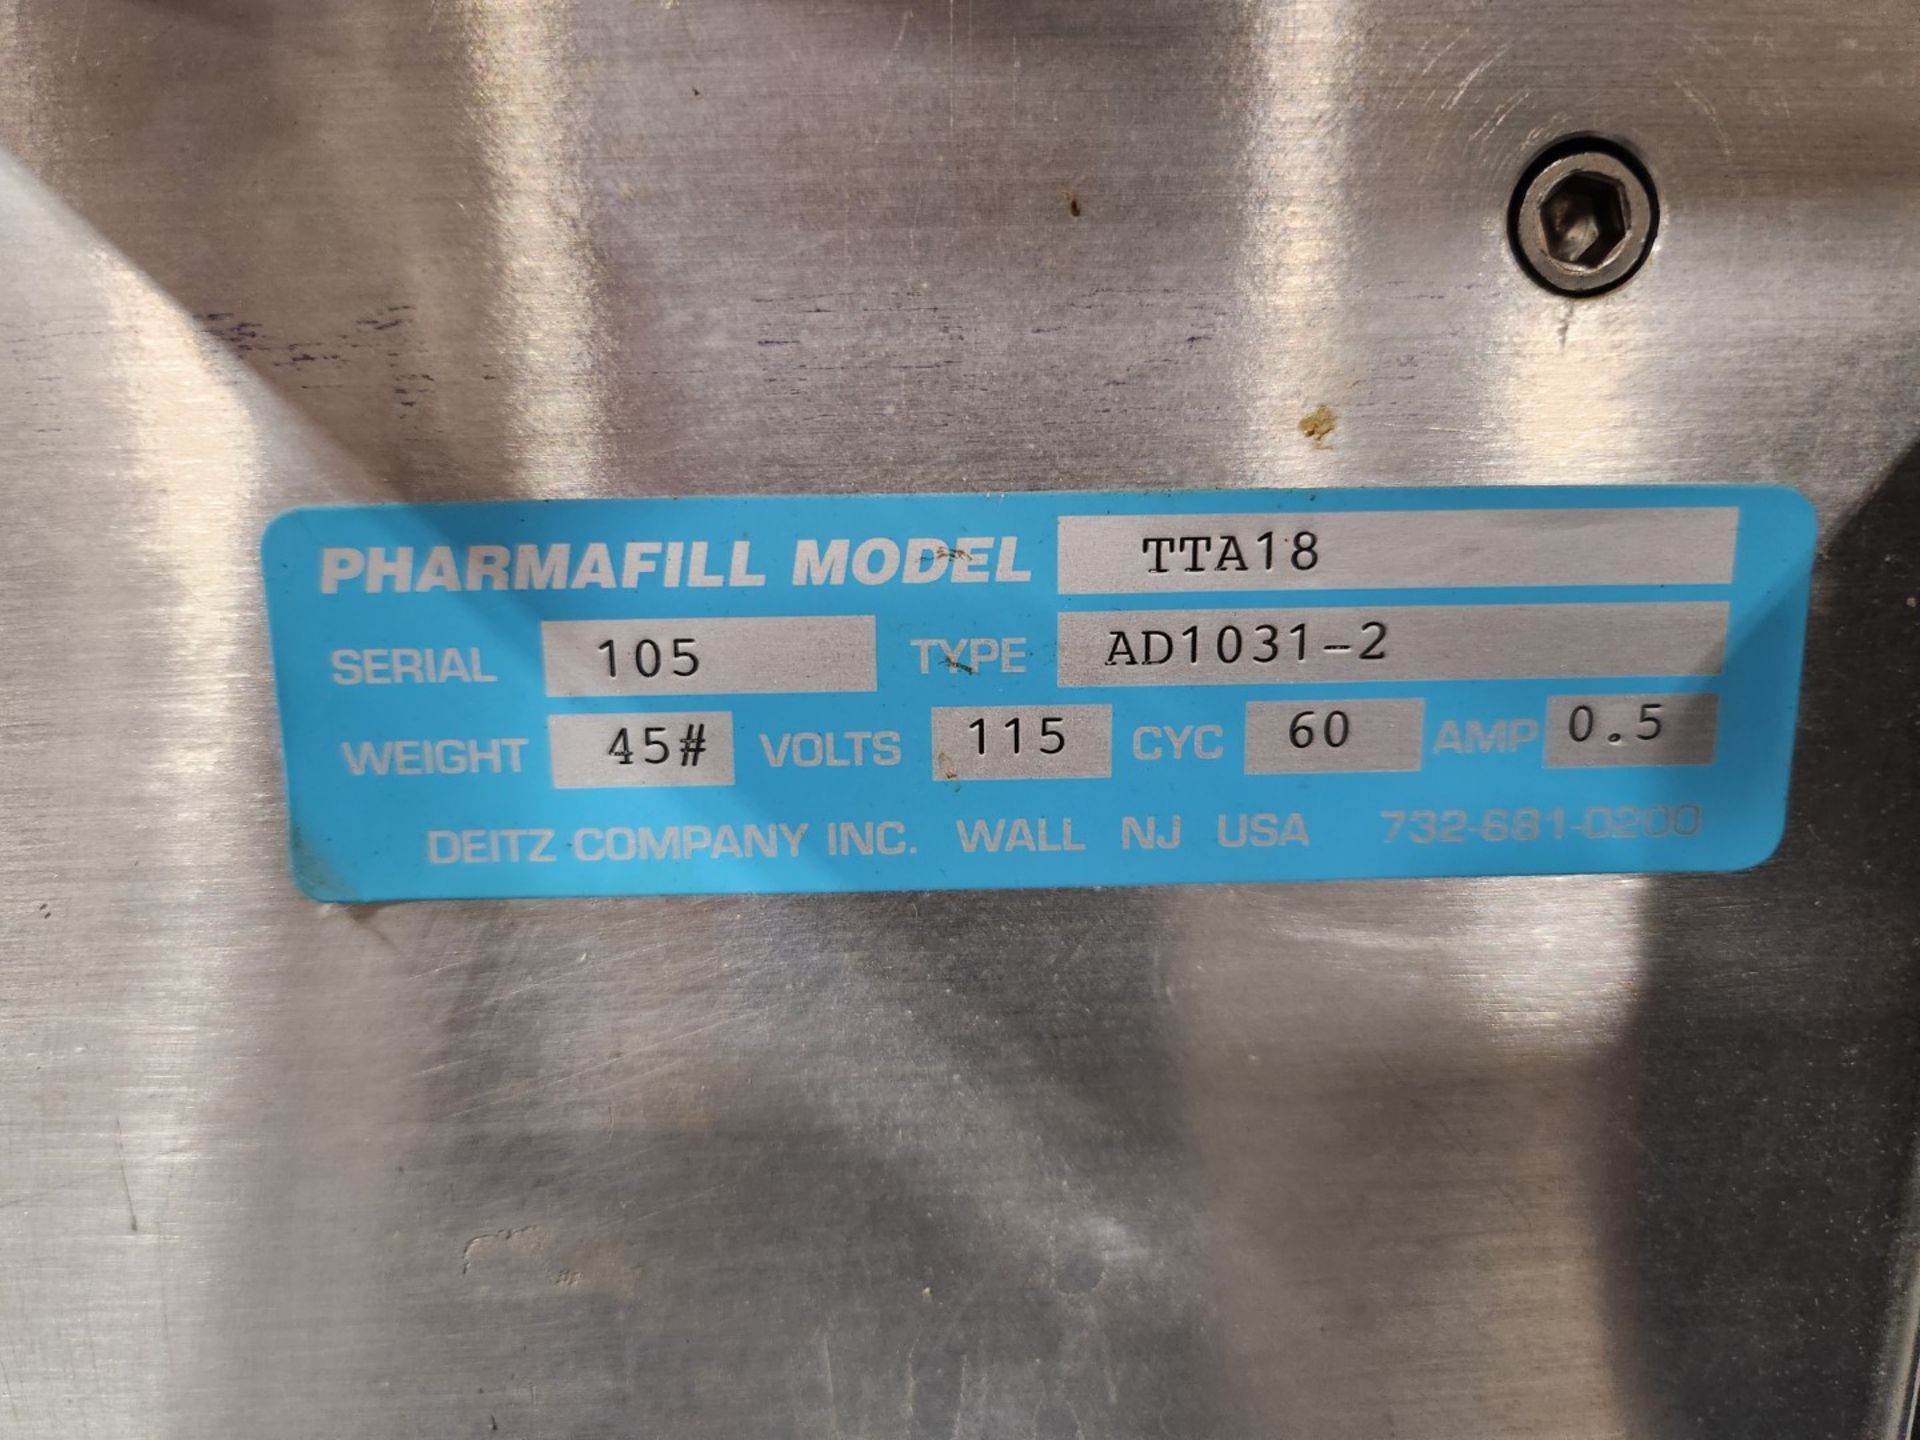 18" Pharmafill accumulation table, stainless steel construction, model TTA18, with controls, - Image 2 of 6